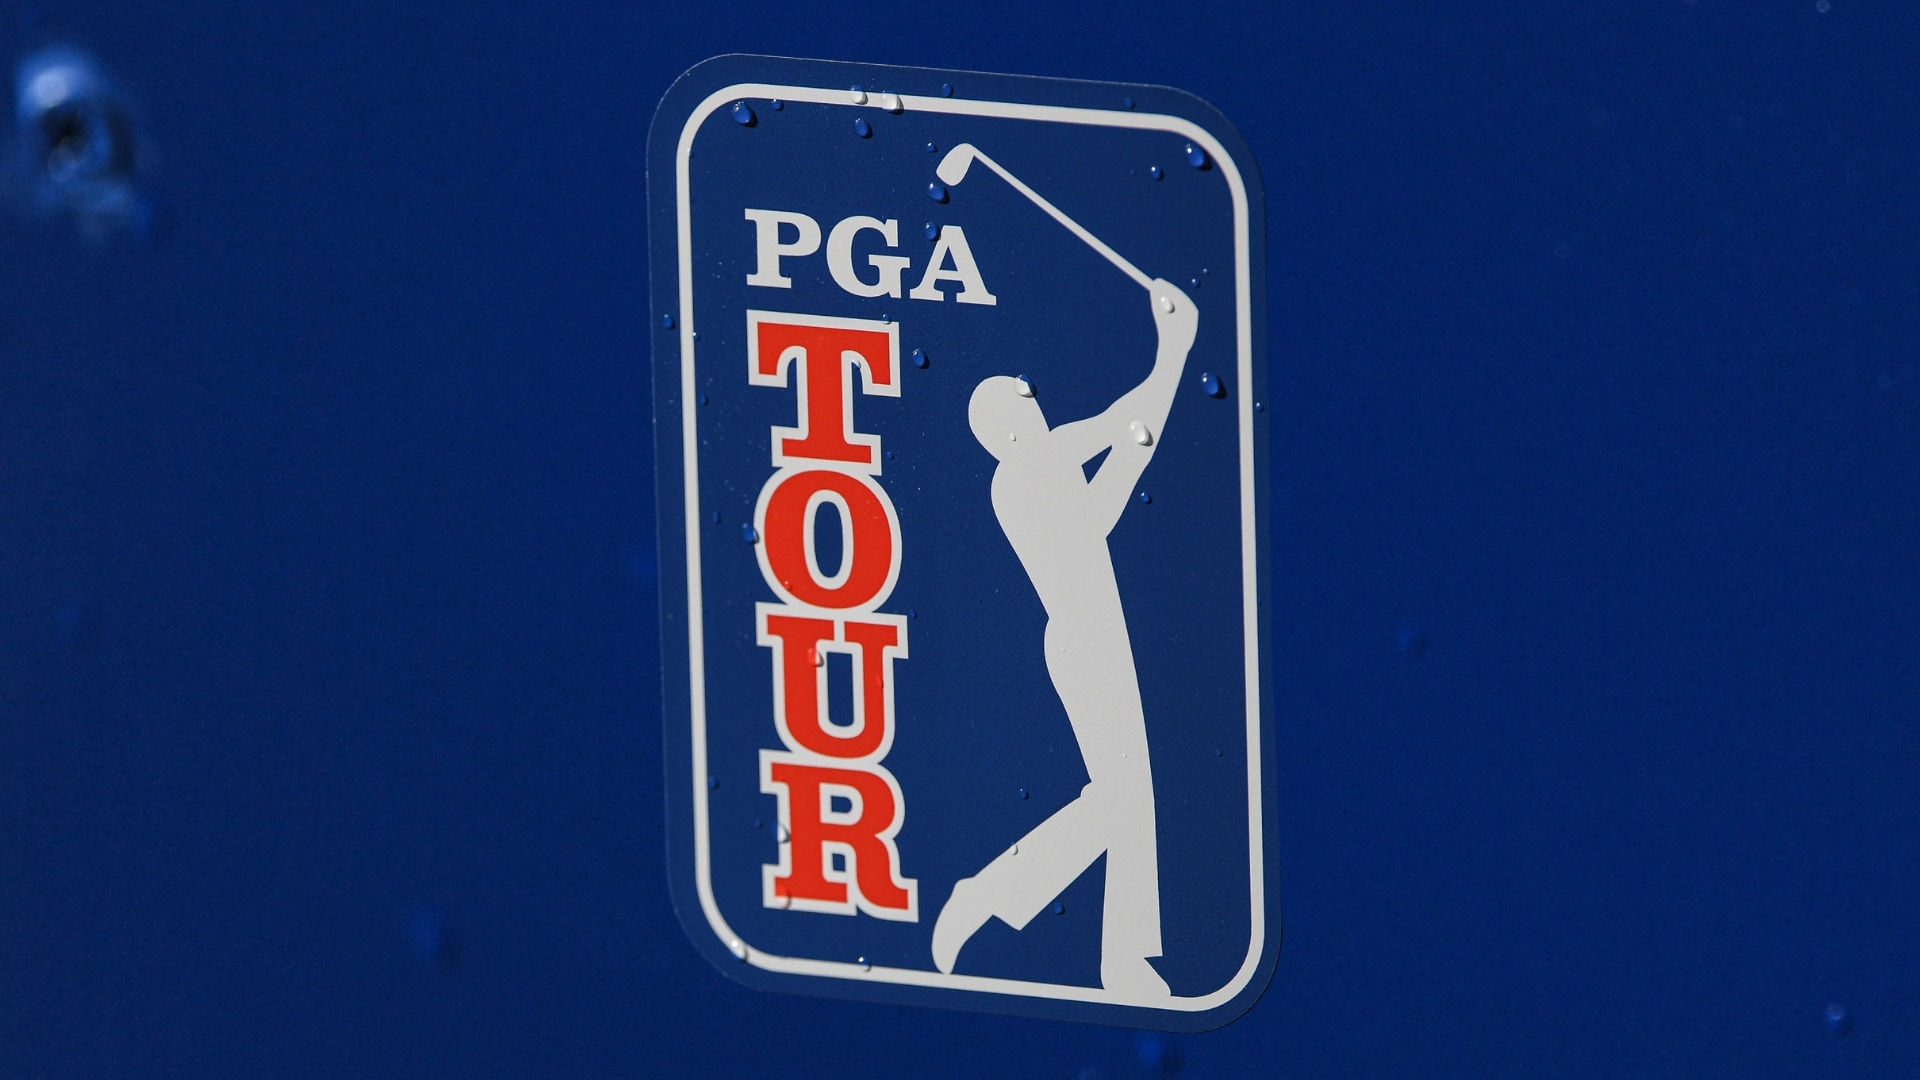 PGA Tour looks to assure players that it is in control of Saudi agreement